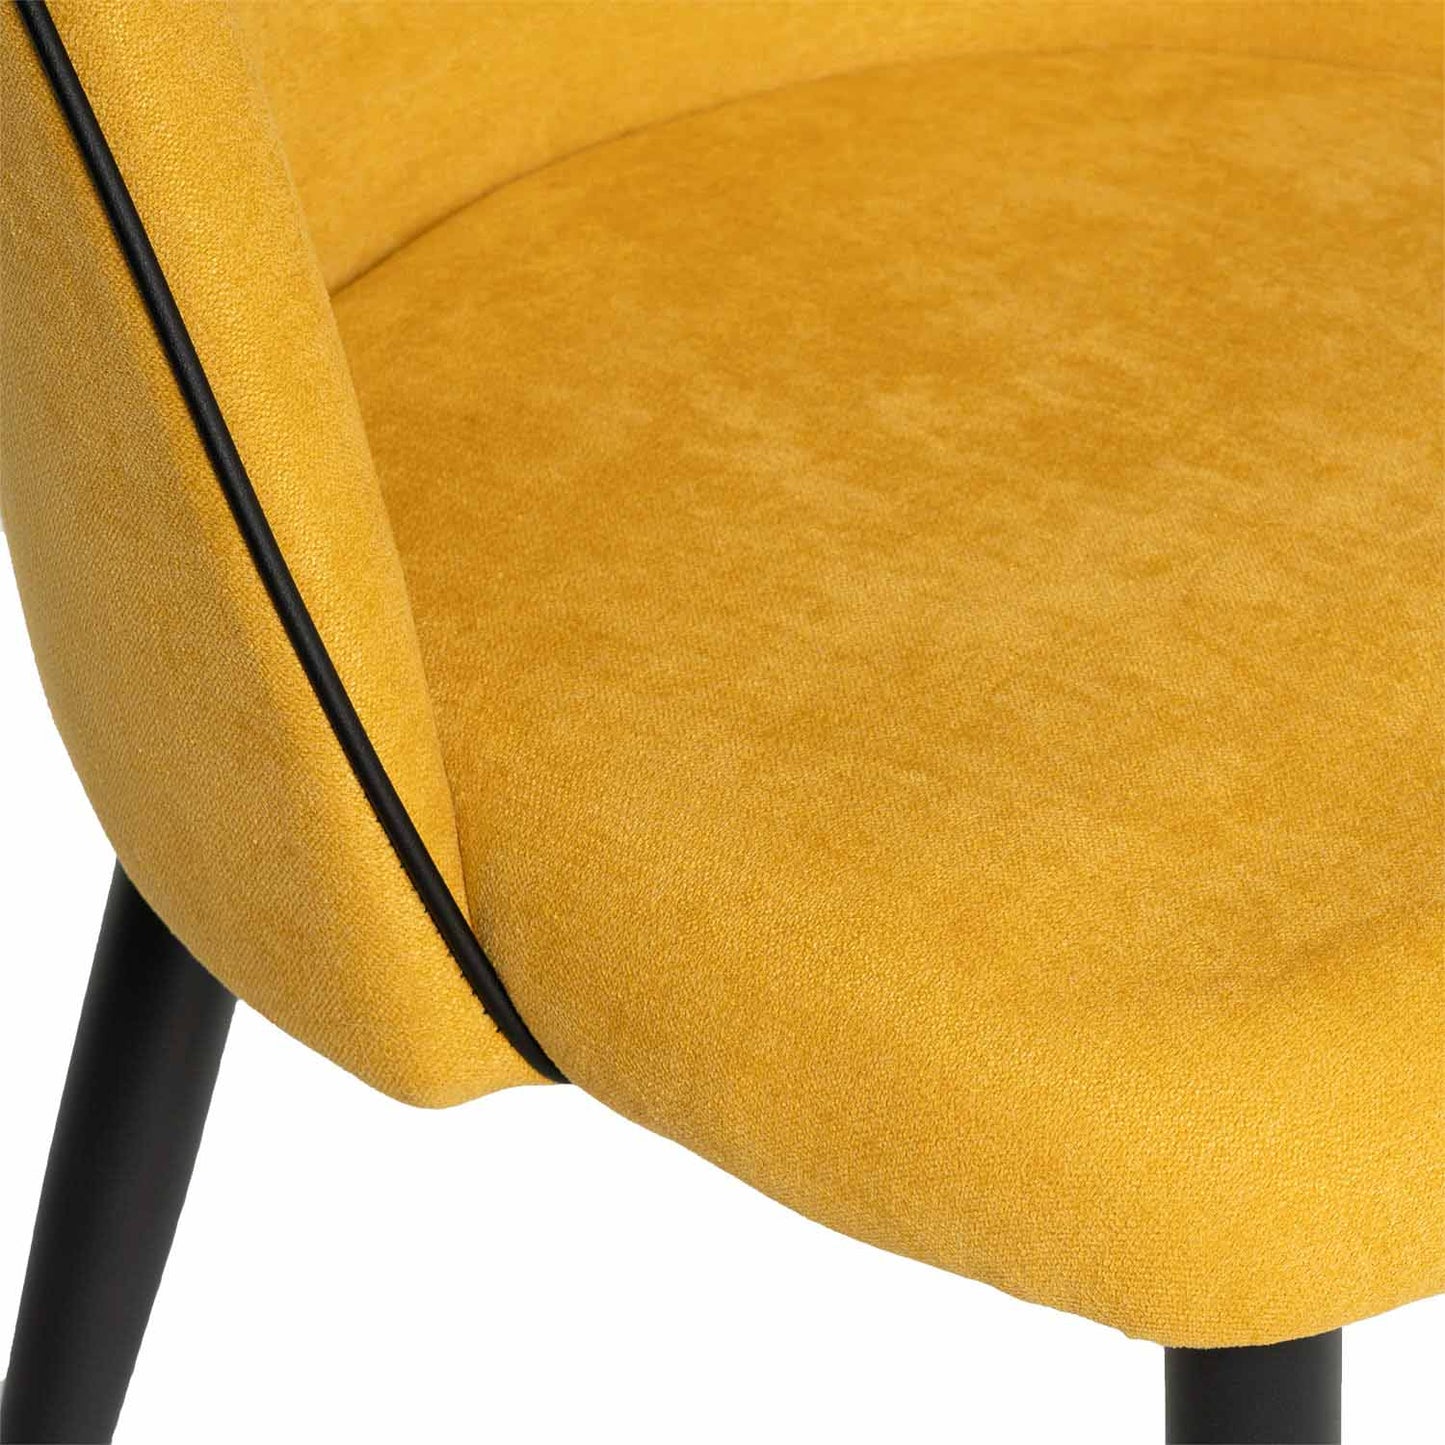 Sloane dining chair